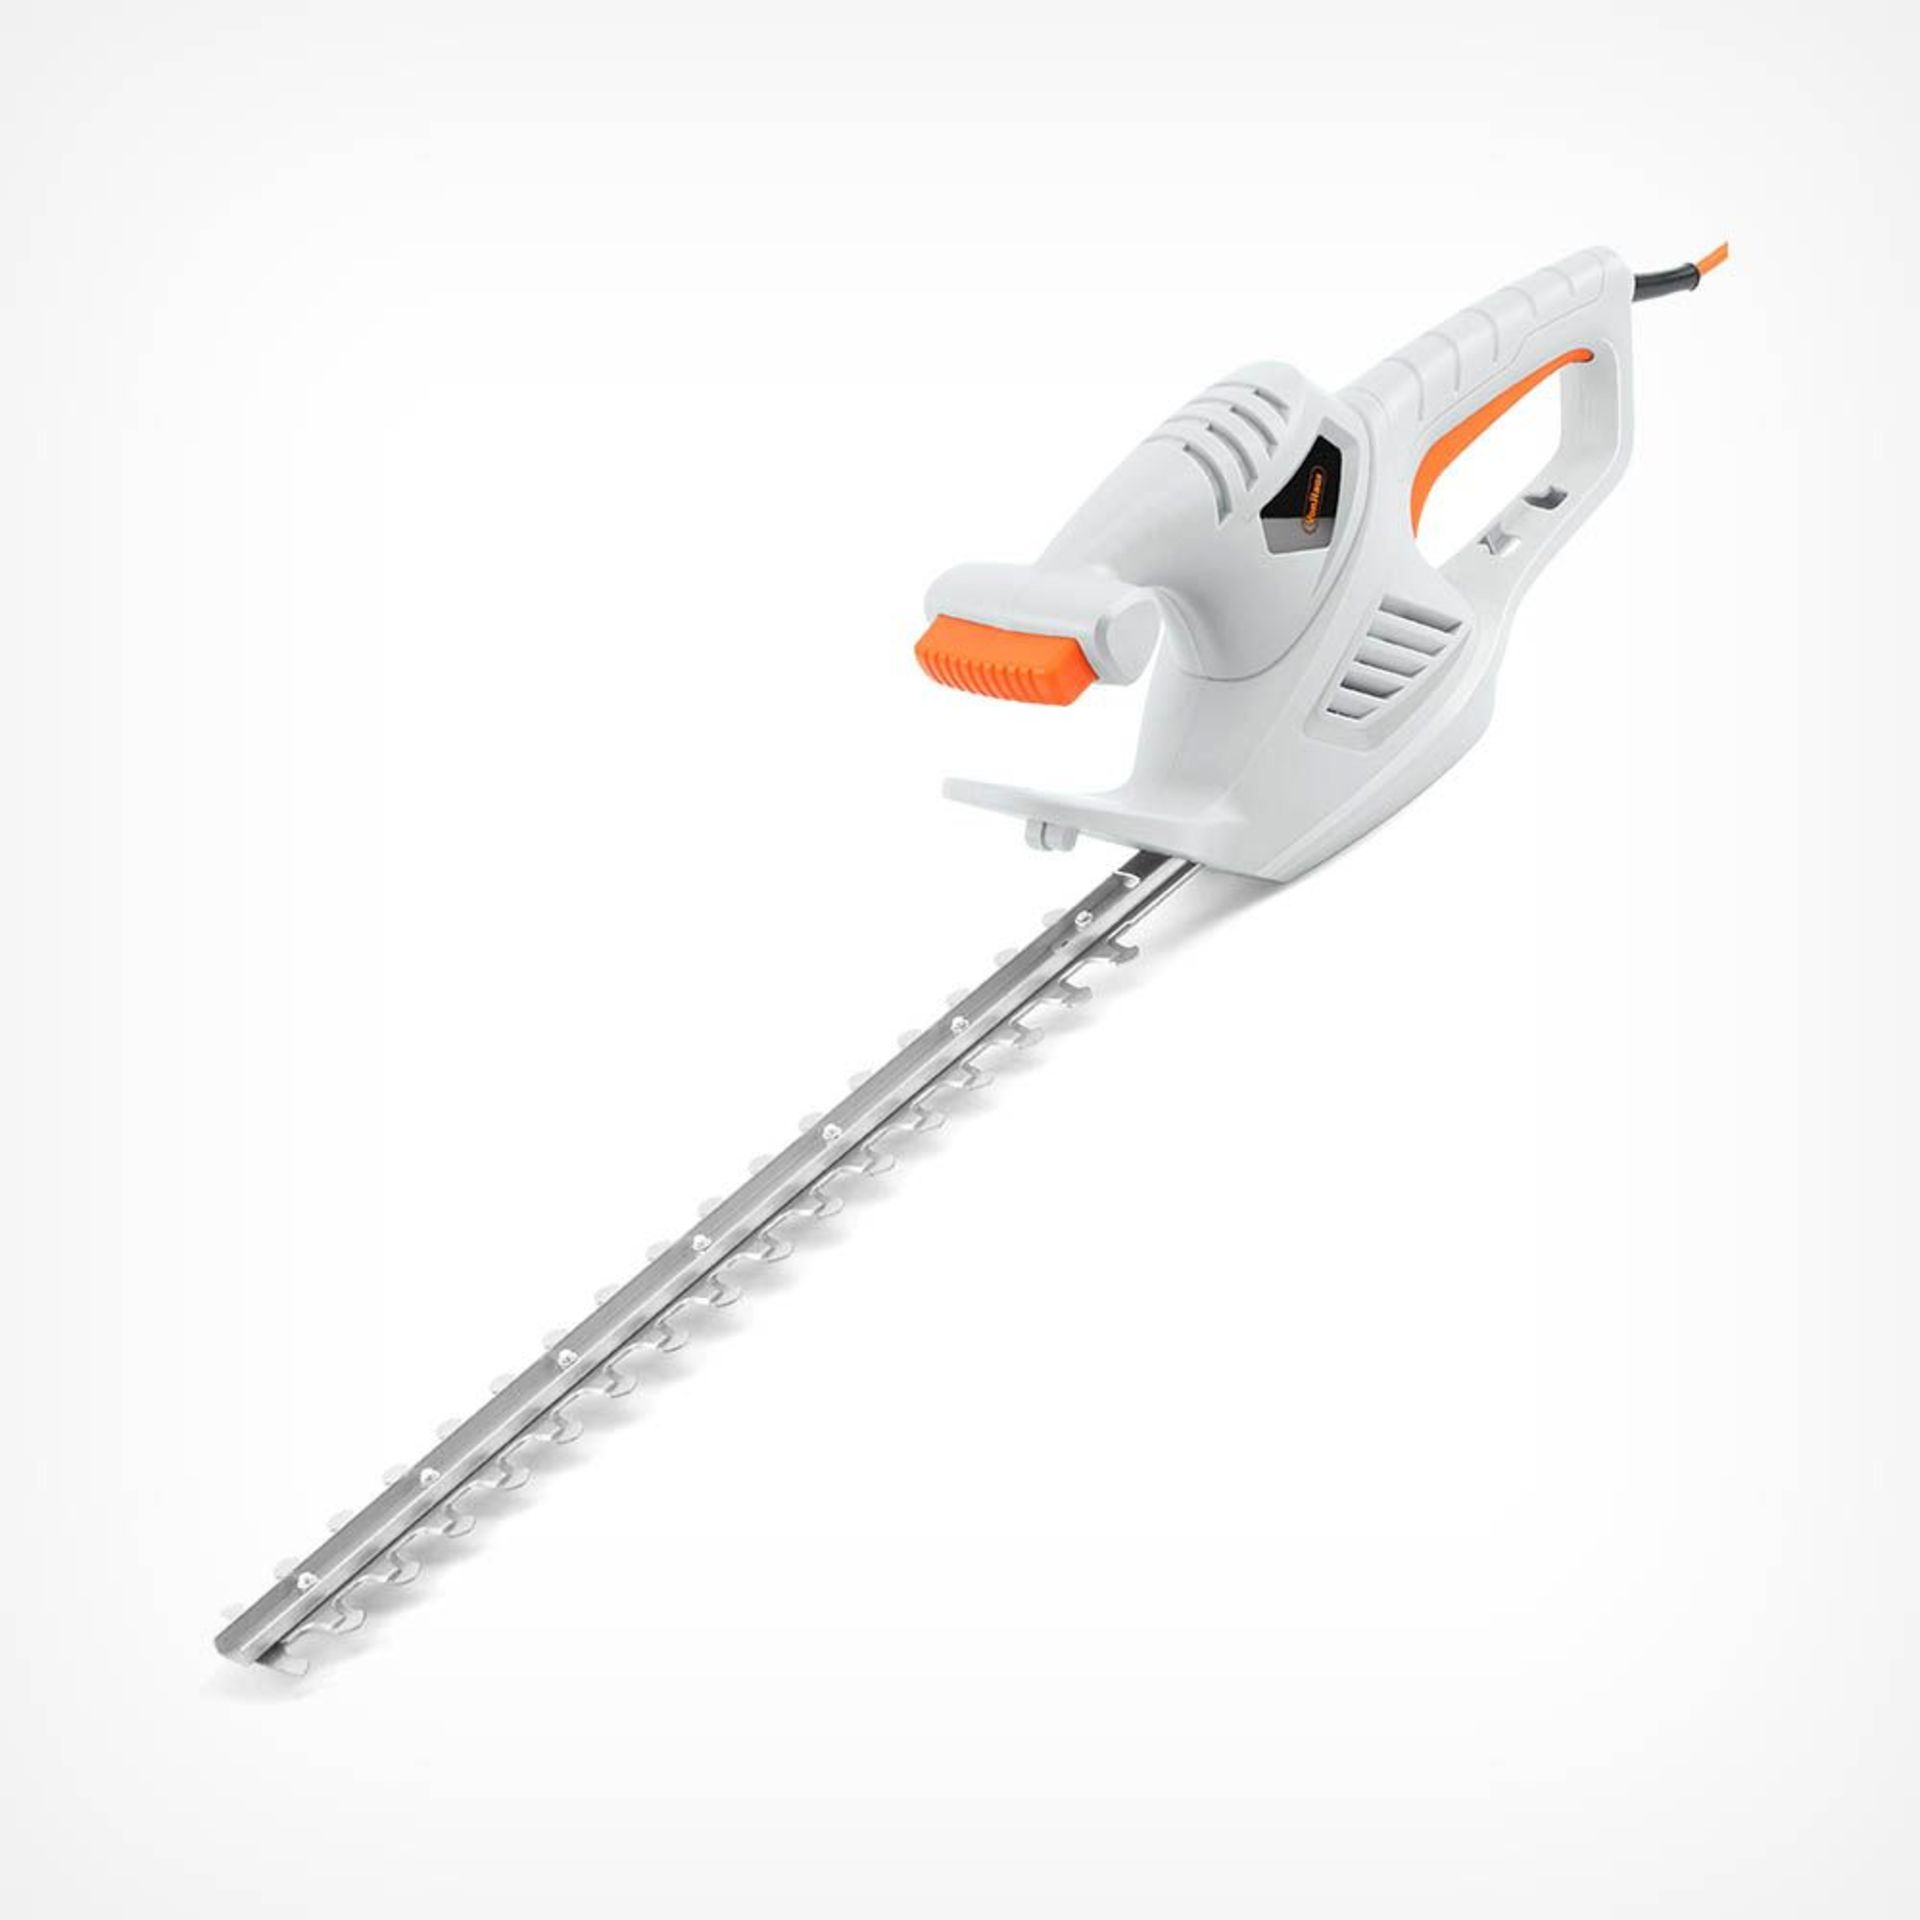 450W Hedge Trimmer. Ideal for trimming back overgrown hedges, tree branches or shaping shrubs this - Image 2 of 2